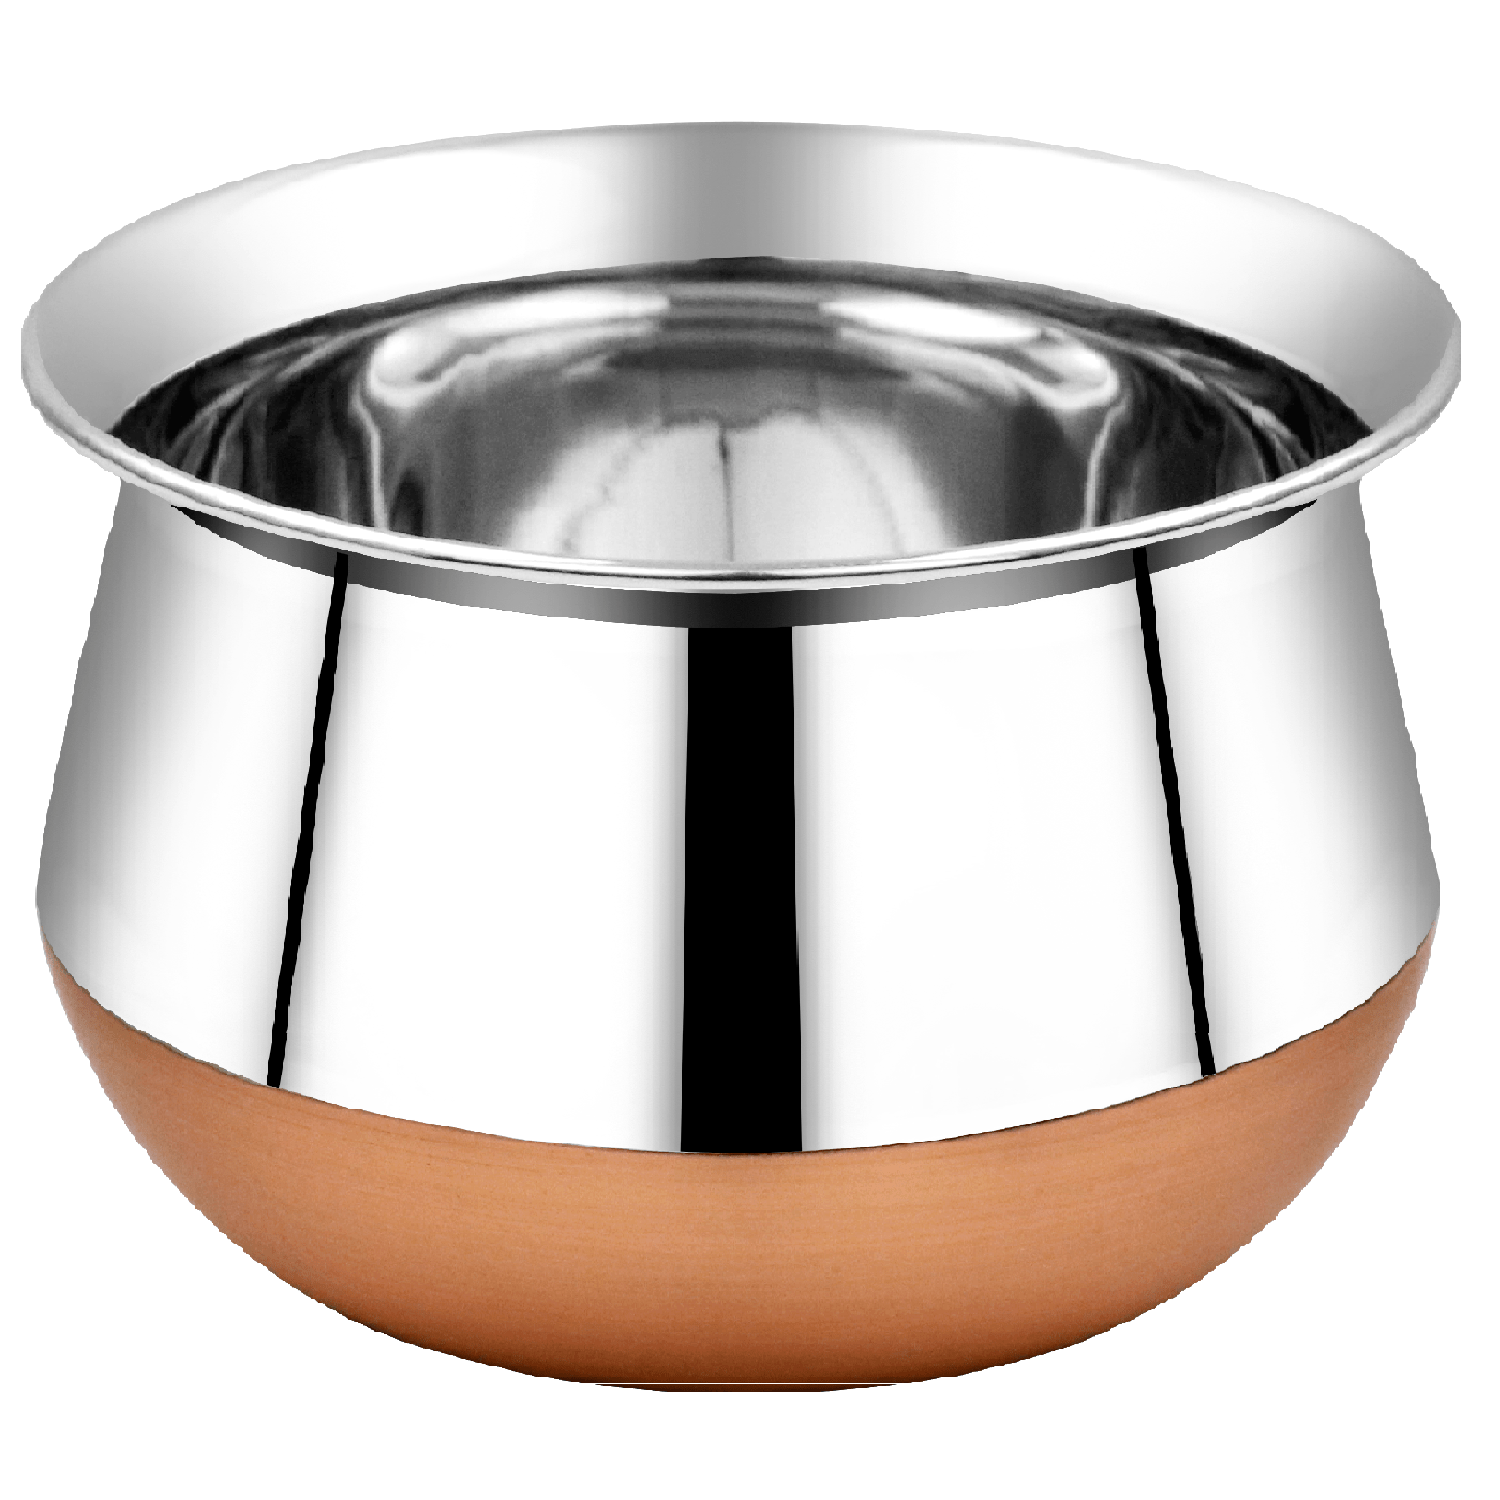 Pongal Handi (Copper) - Set of 6pcs - Induction and Gas compatible